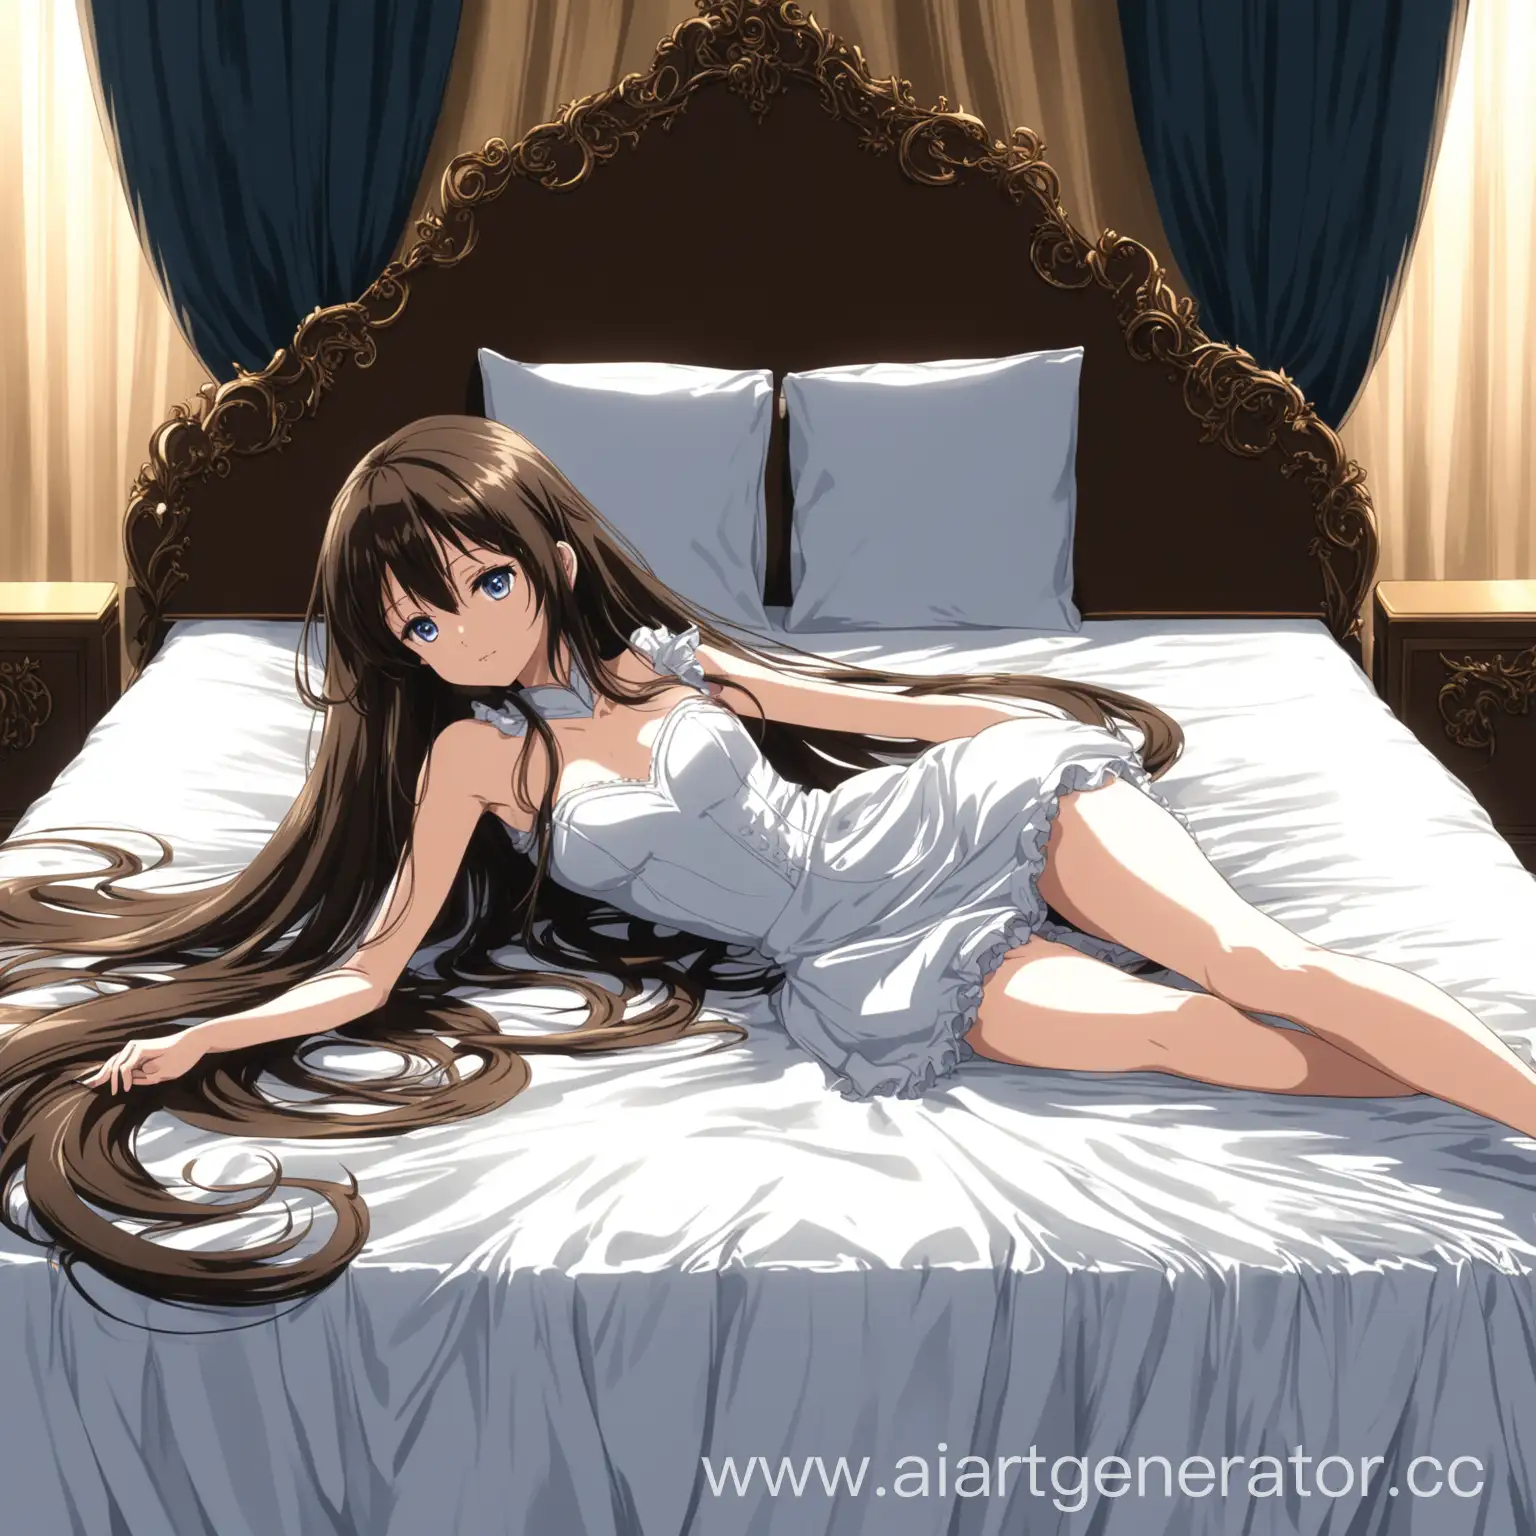 Elegant-Anime-Girl-Rests-Gracefully-on-Bed-with-Flowing-Hair